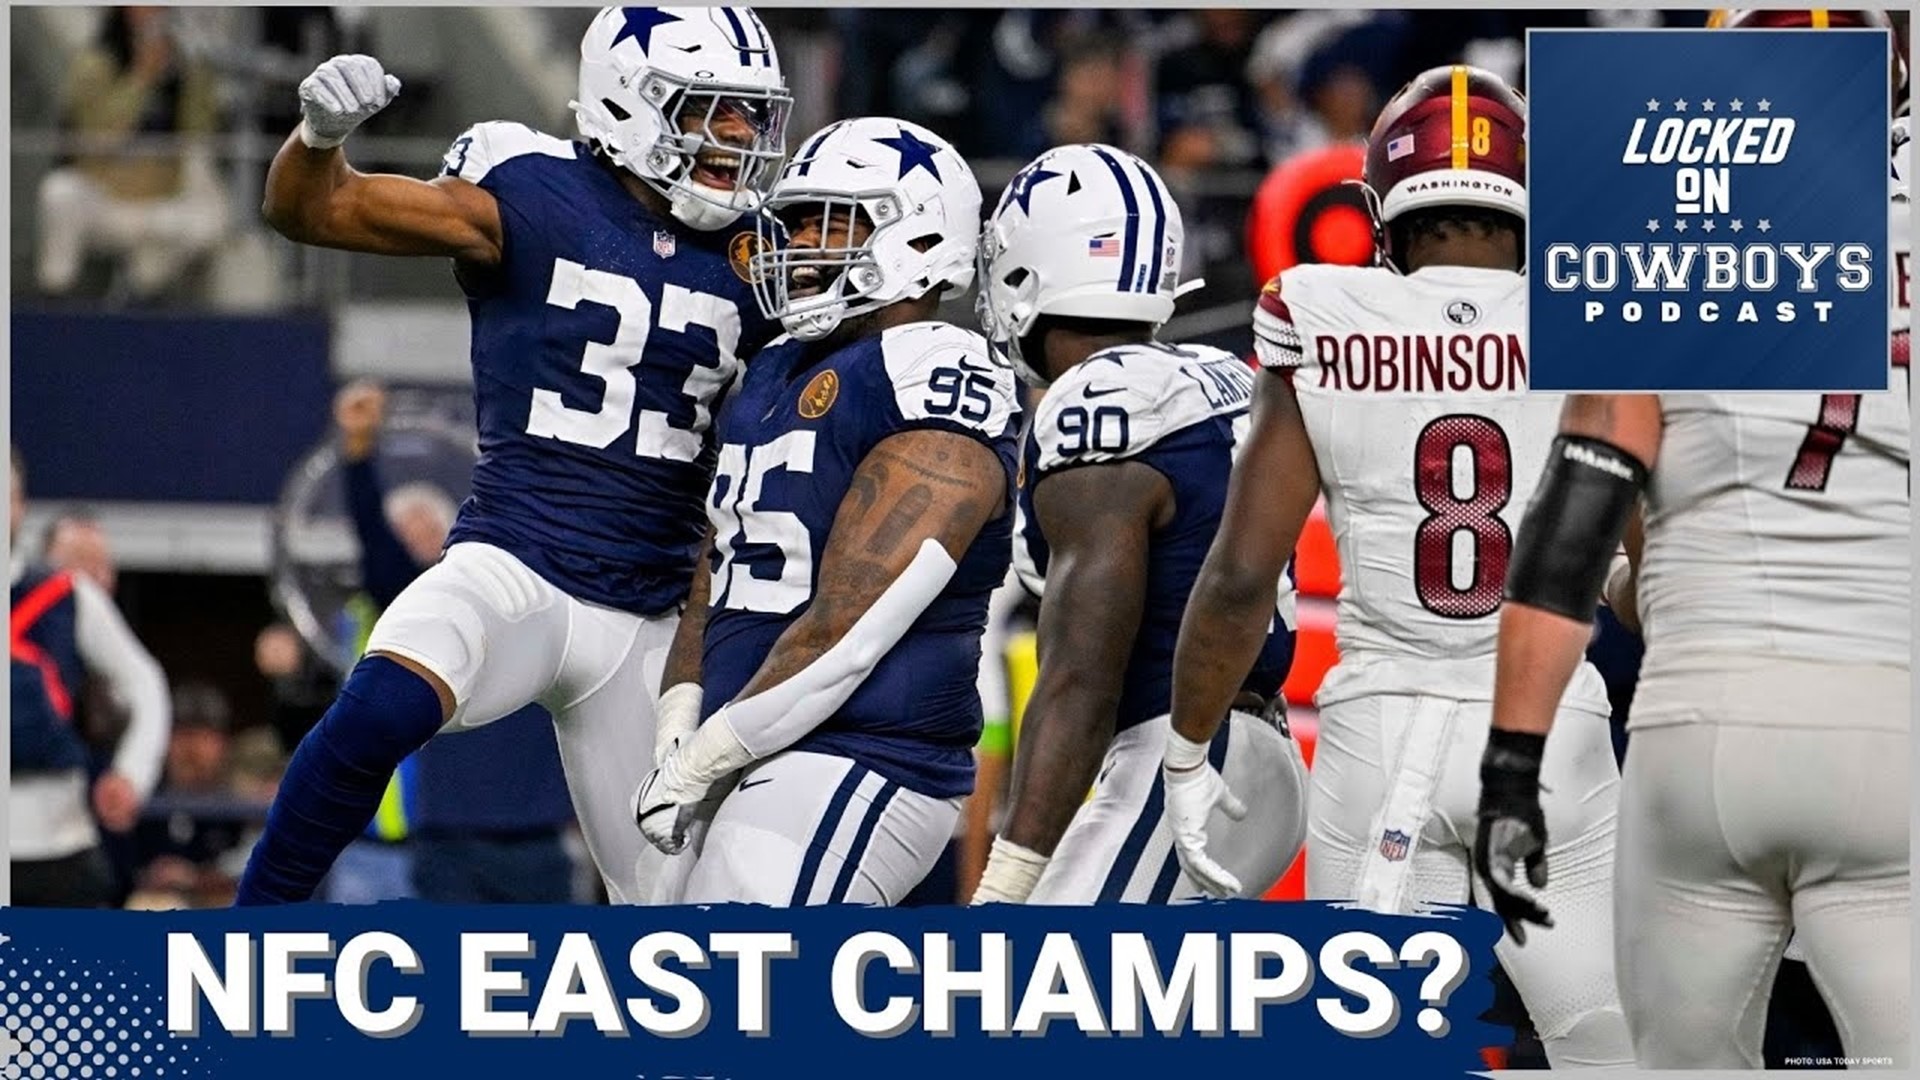 The Dallas Cowboys need one more win to clinch the NFC East. Will they beat the Washington Commanders in Week 18 to recapture the divisional crown from the Eagles?